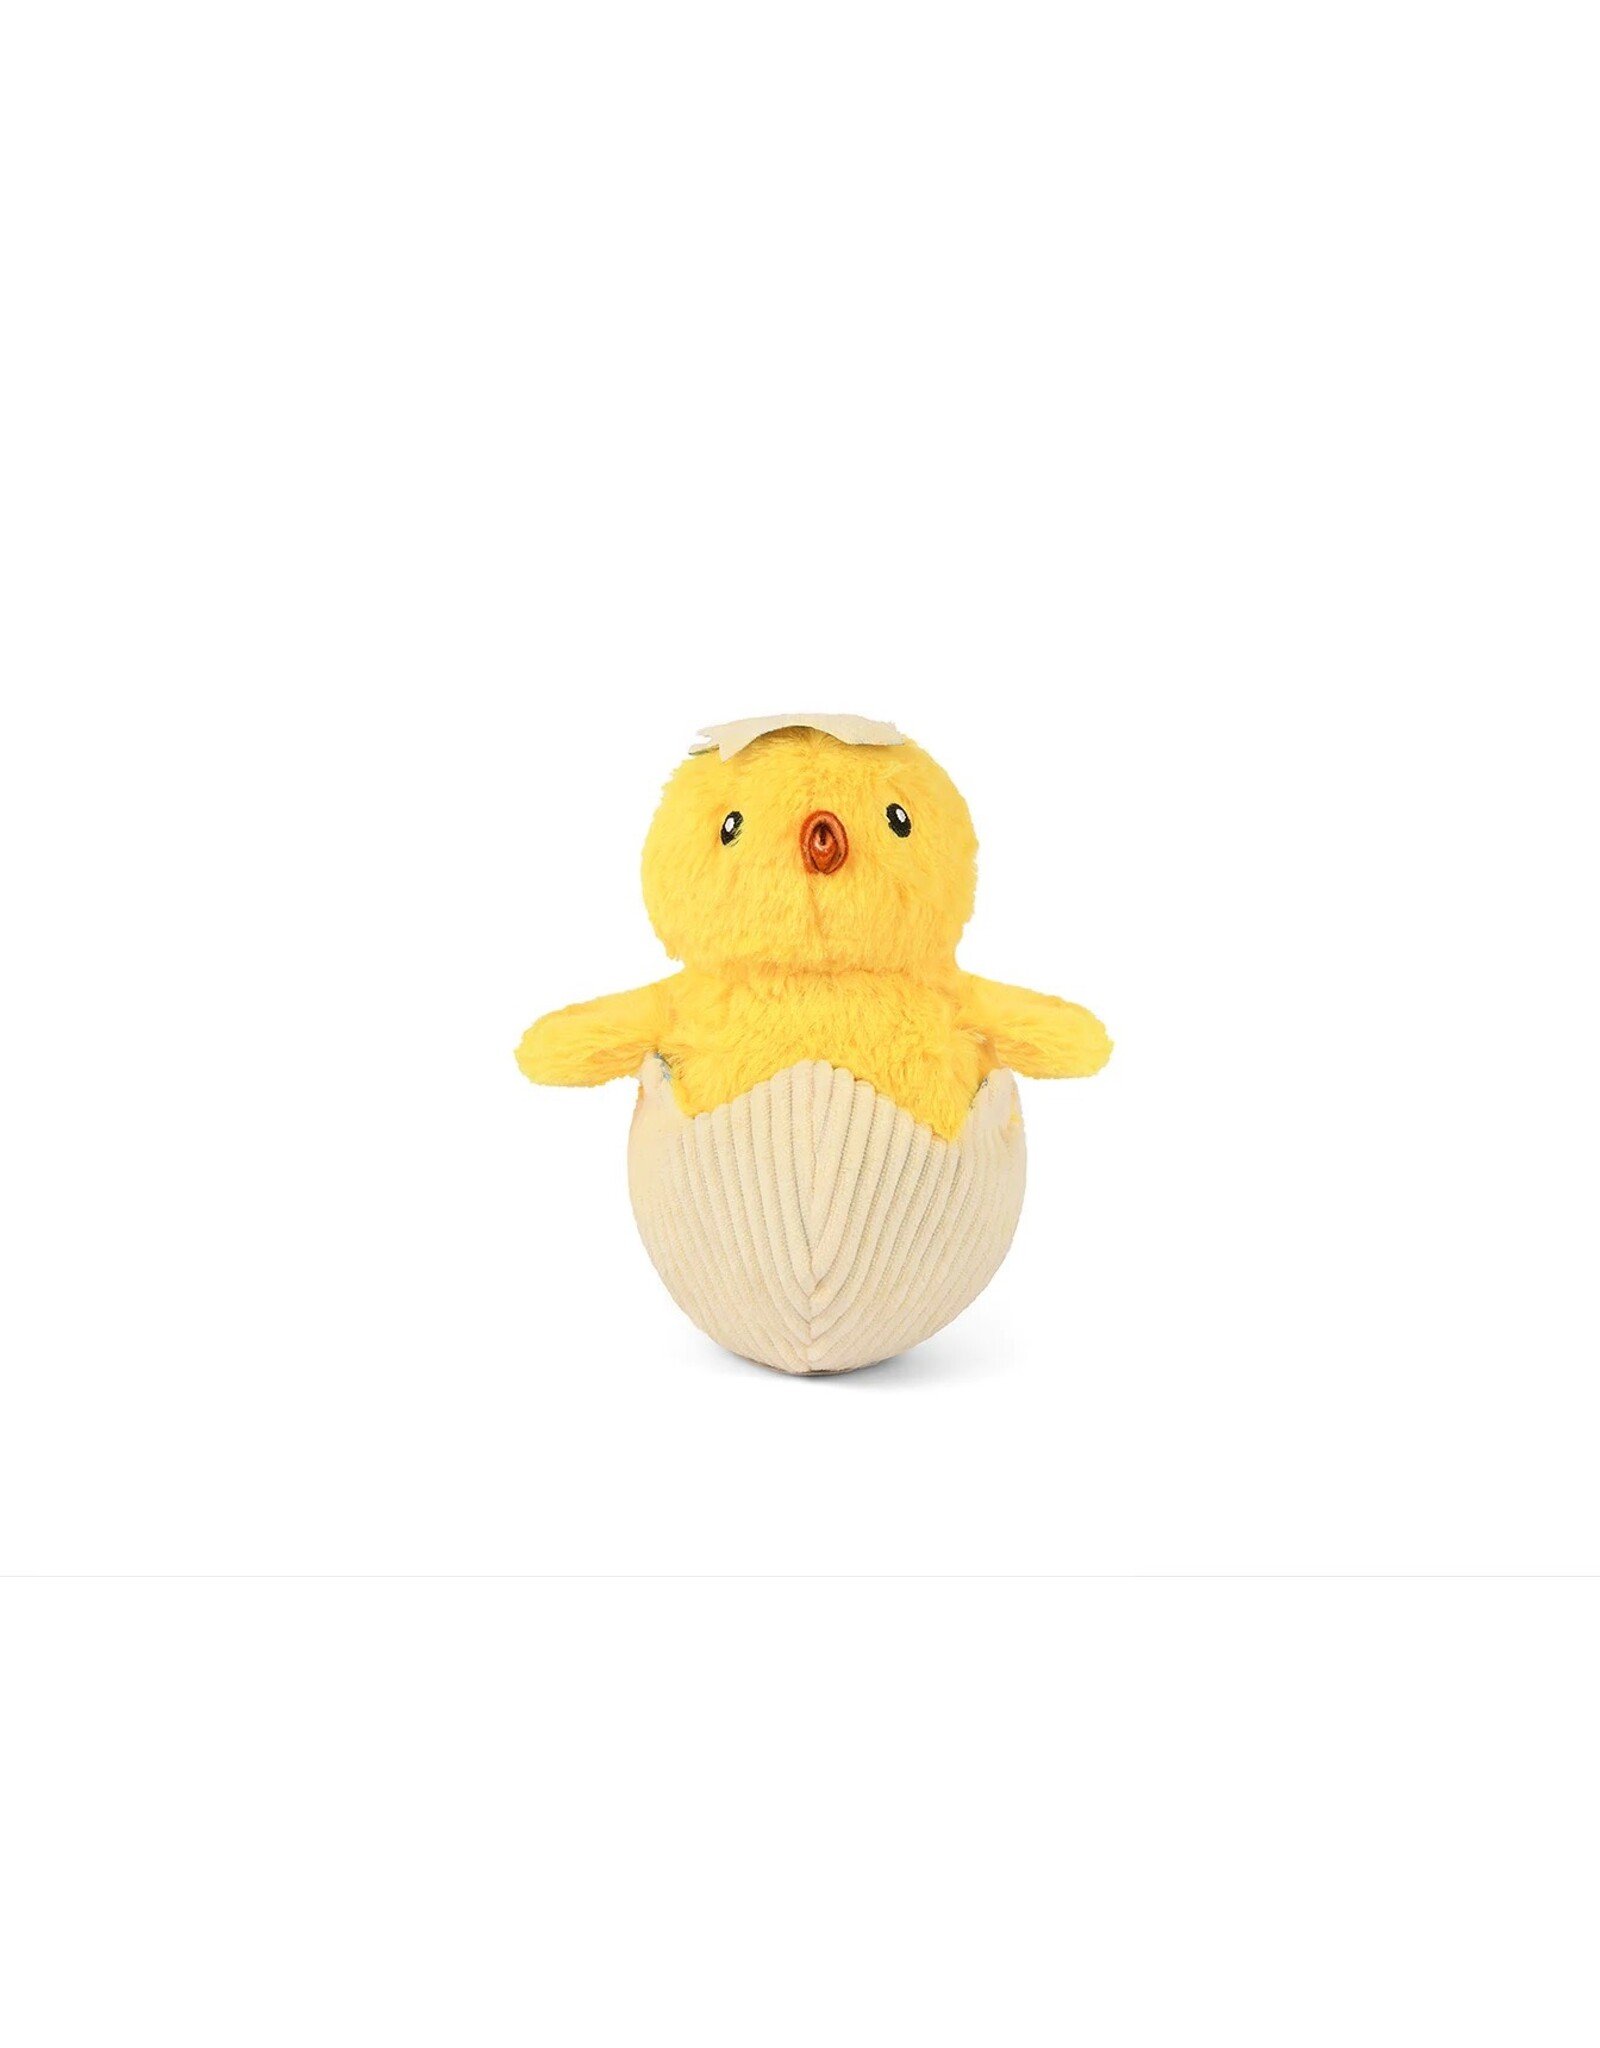 PLAY PLAY HIPPITY HOPPITY HATCHING CHICK TOY